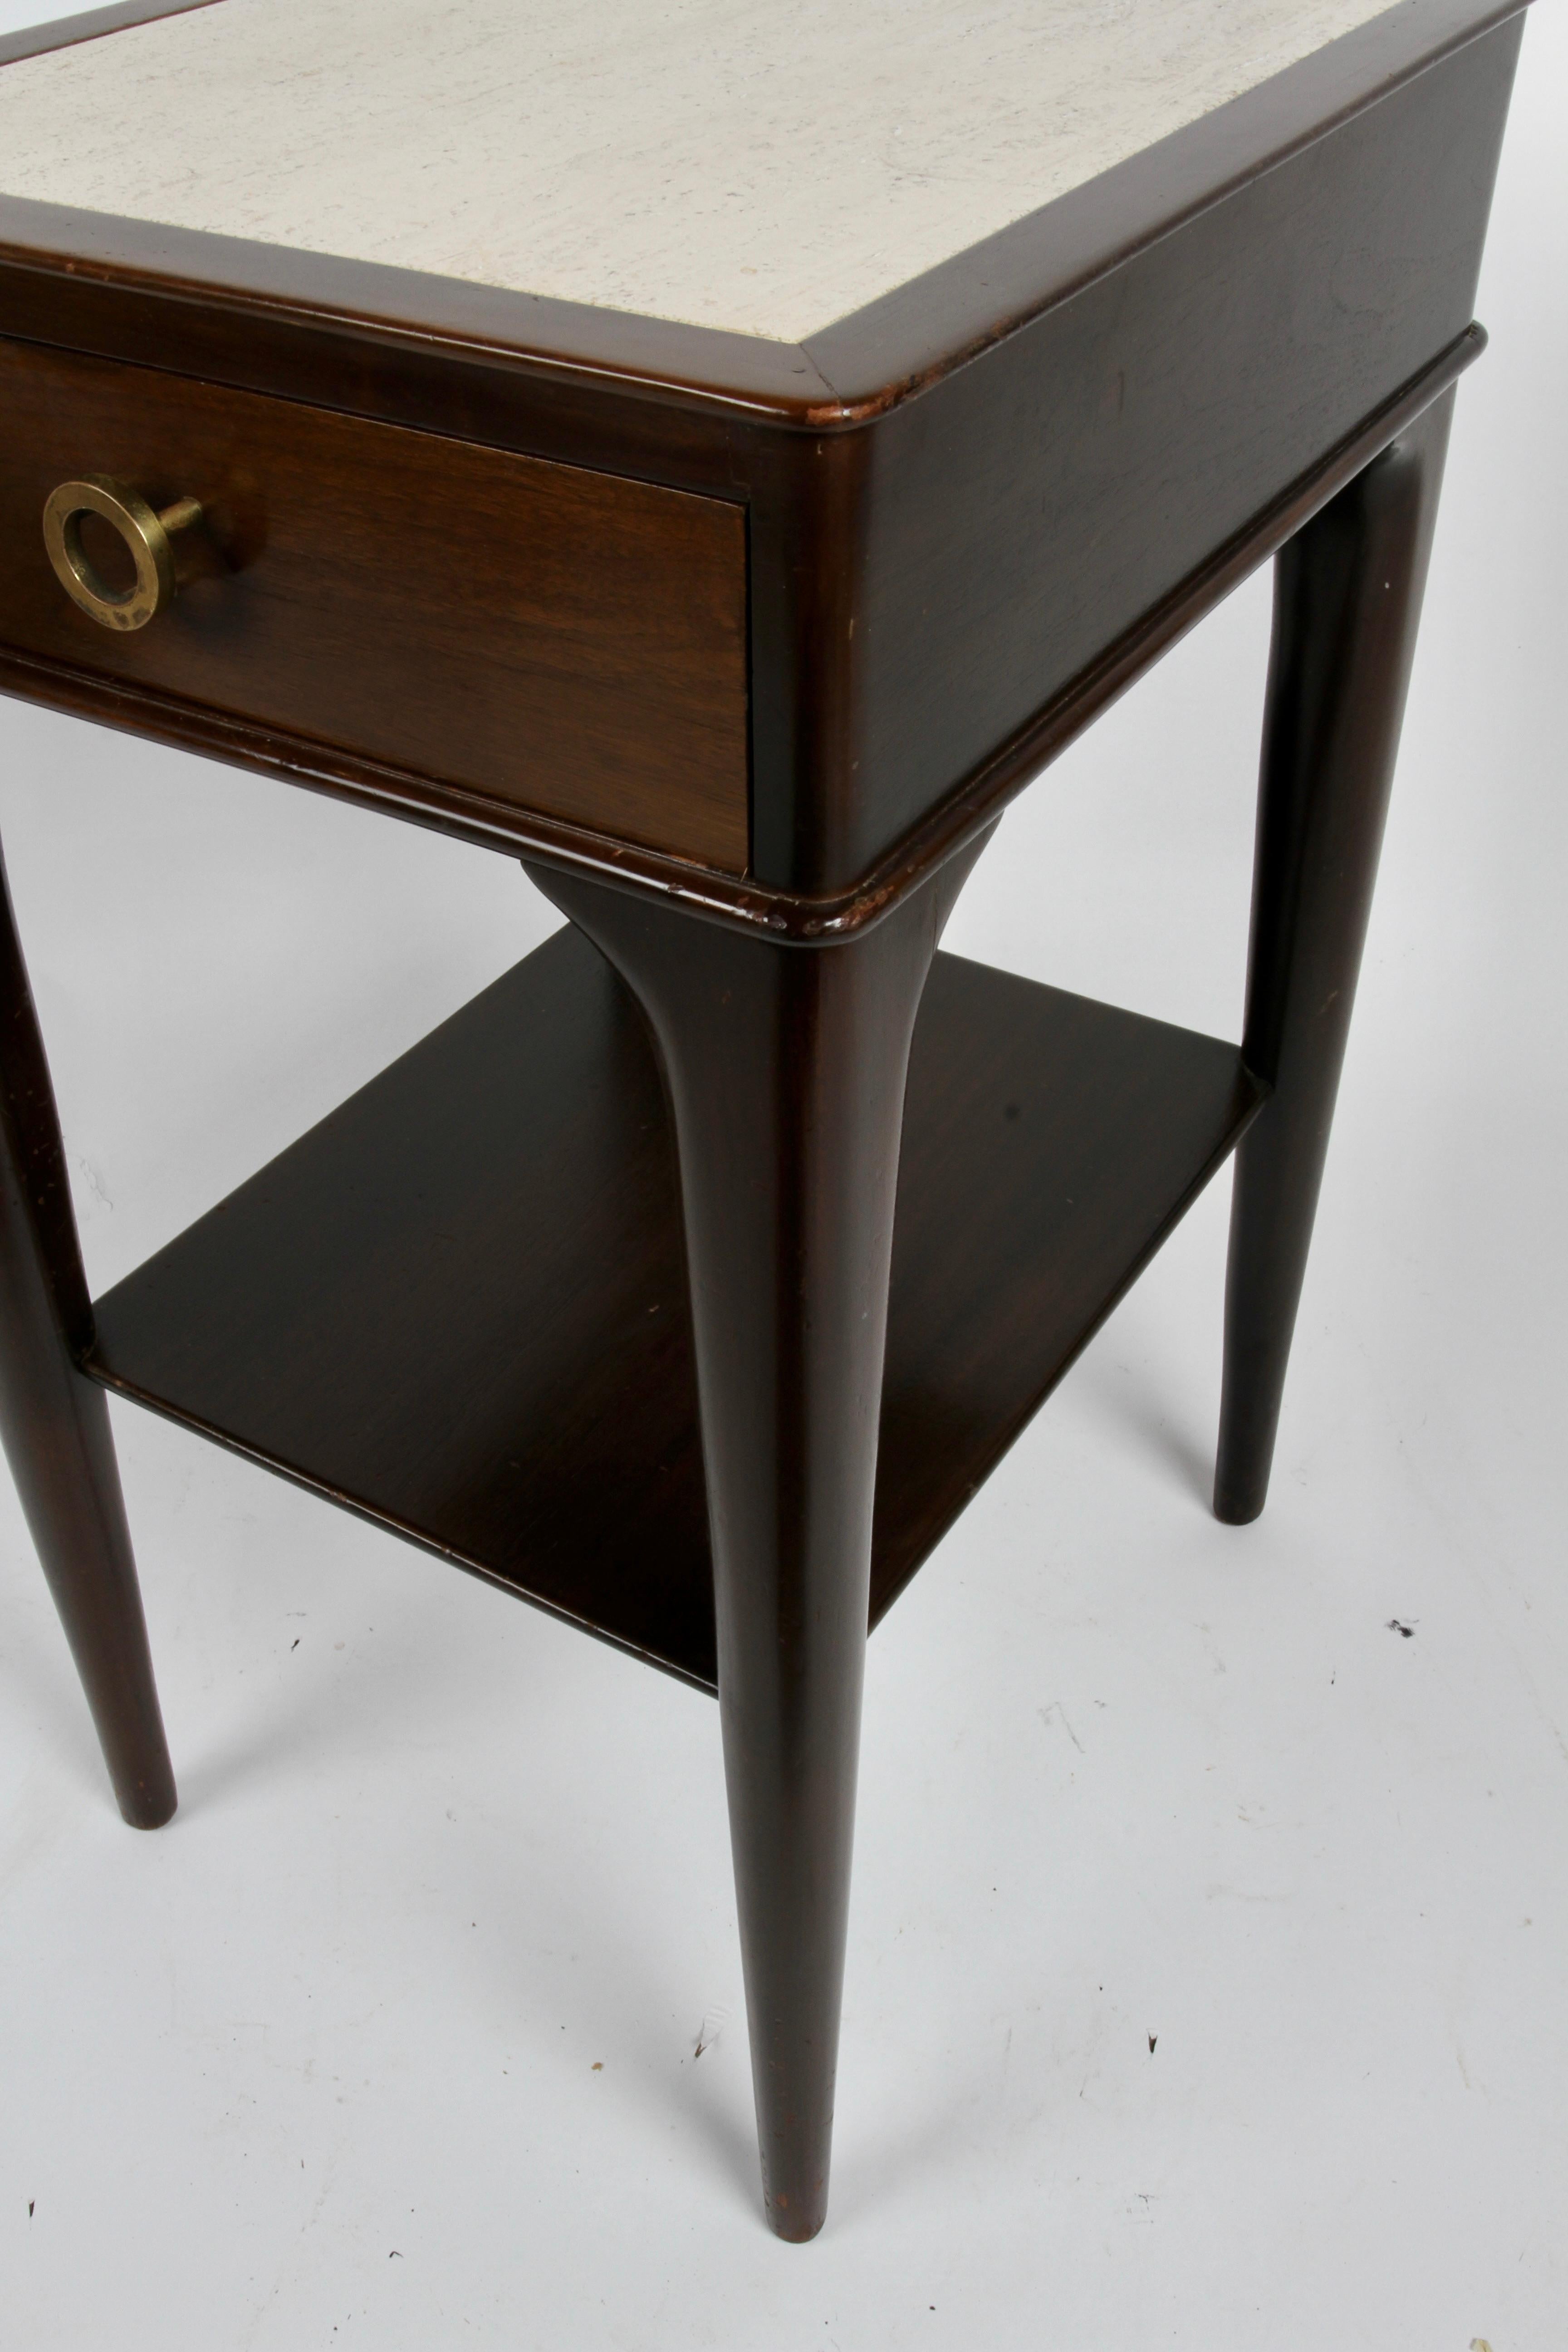 Pair of Rare Edward Wormley Dunbar for Modern Elegant Nightstands or End Tables  For Sale 2